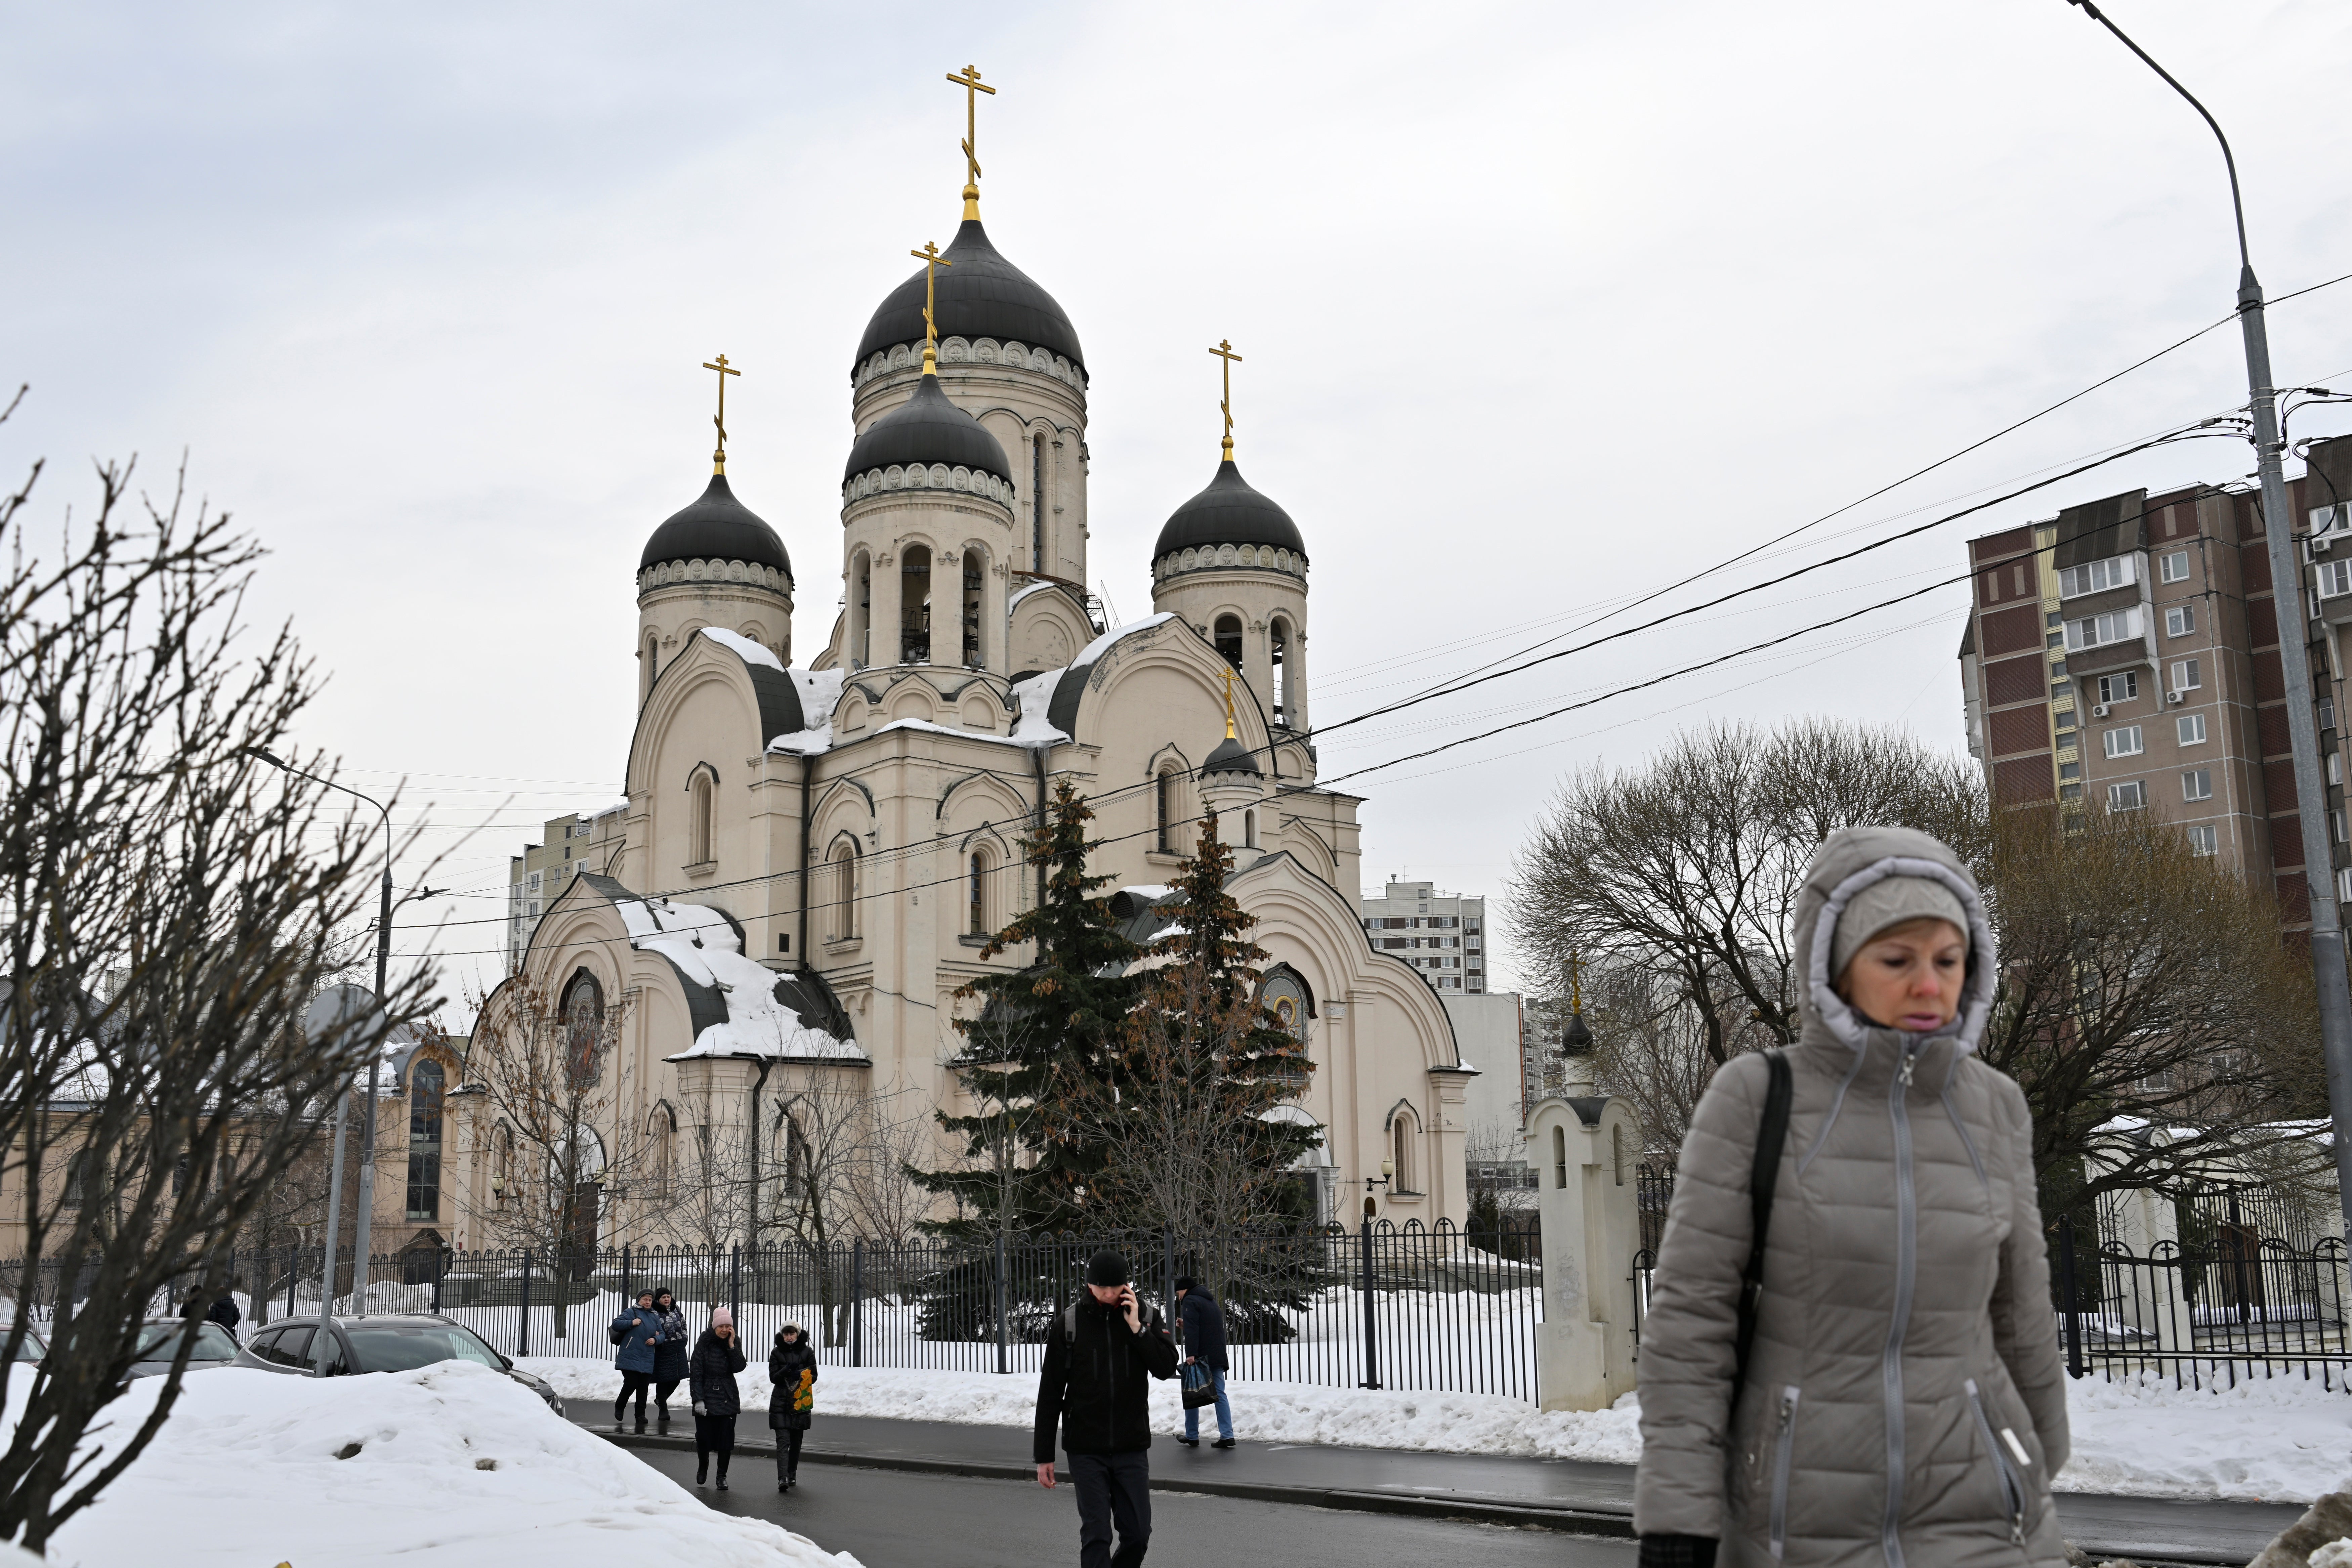 The Church of the Icon of the Mother of God, where Navalny allies have warned police could use violence to disperse mourners